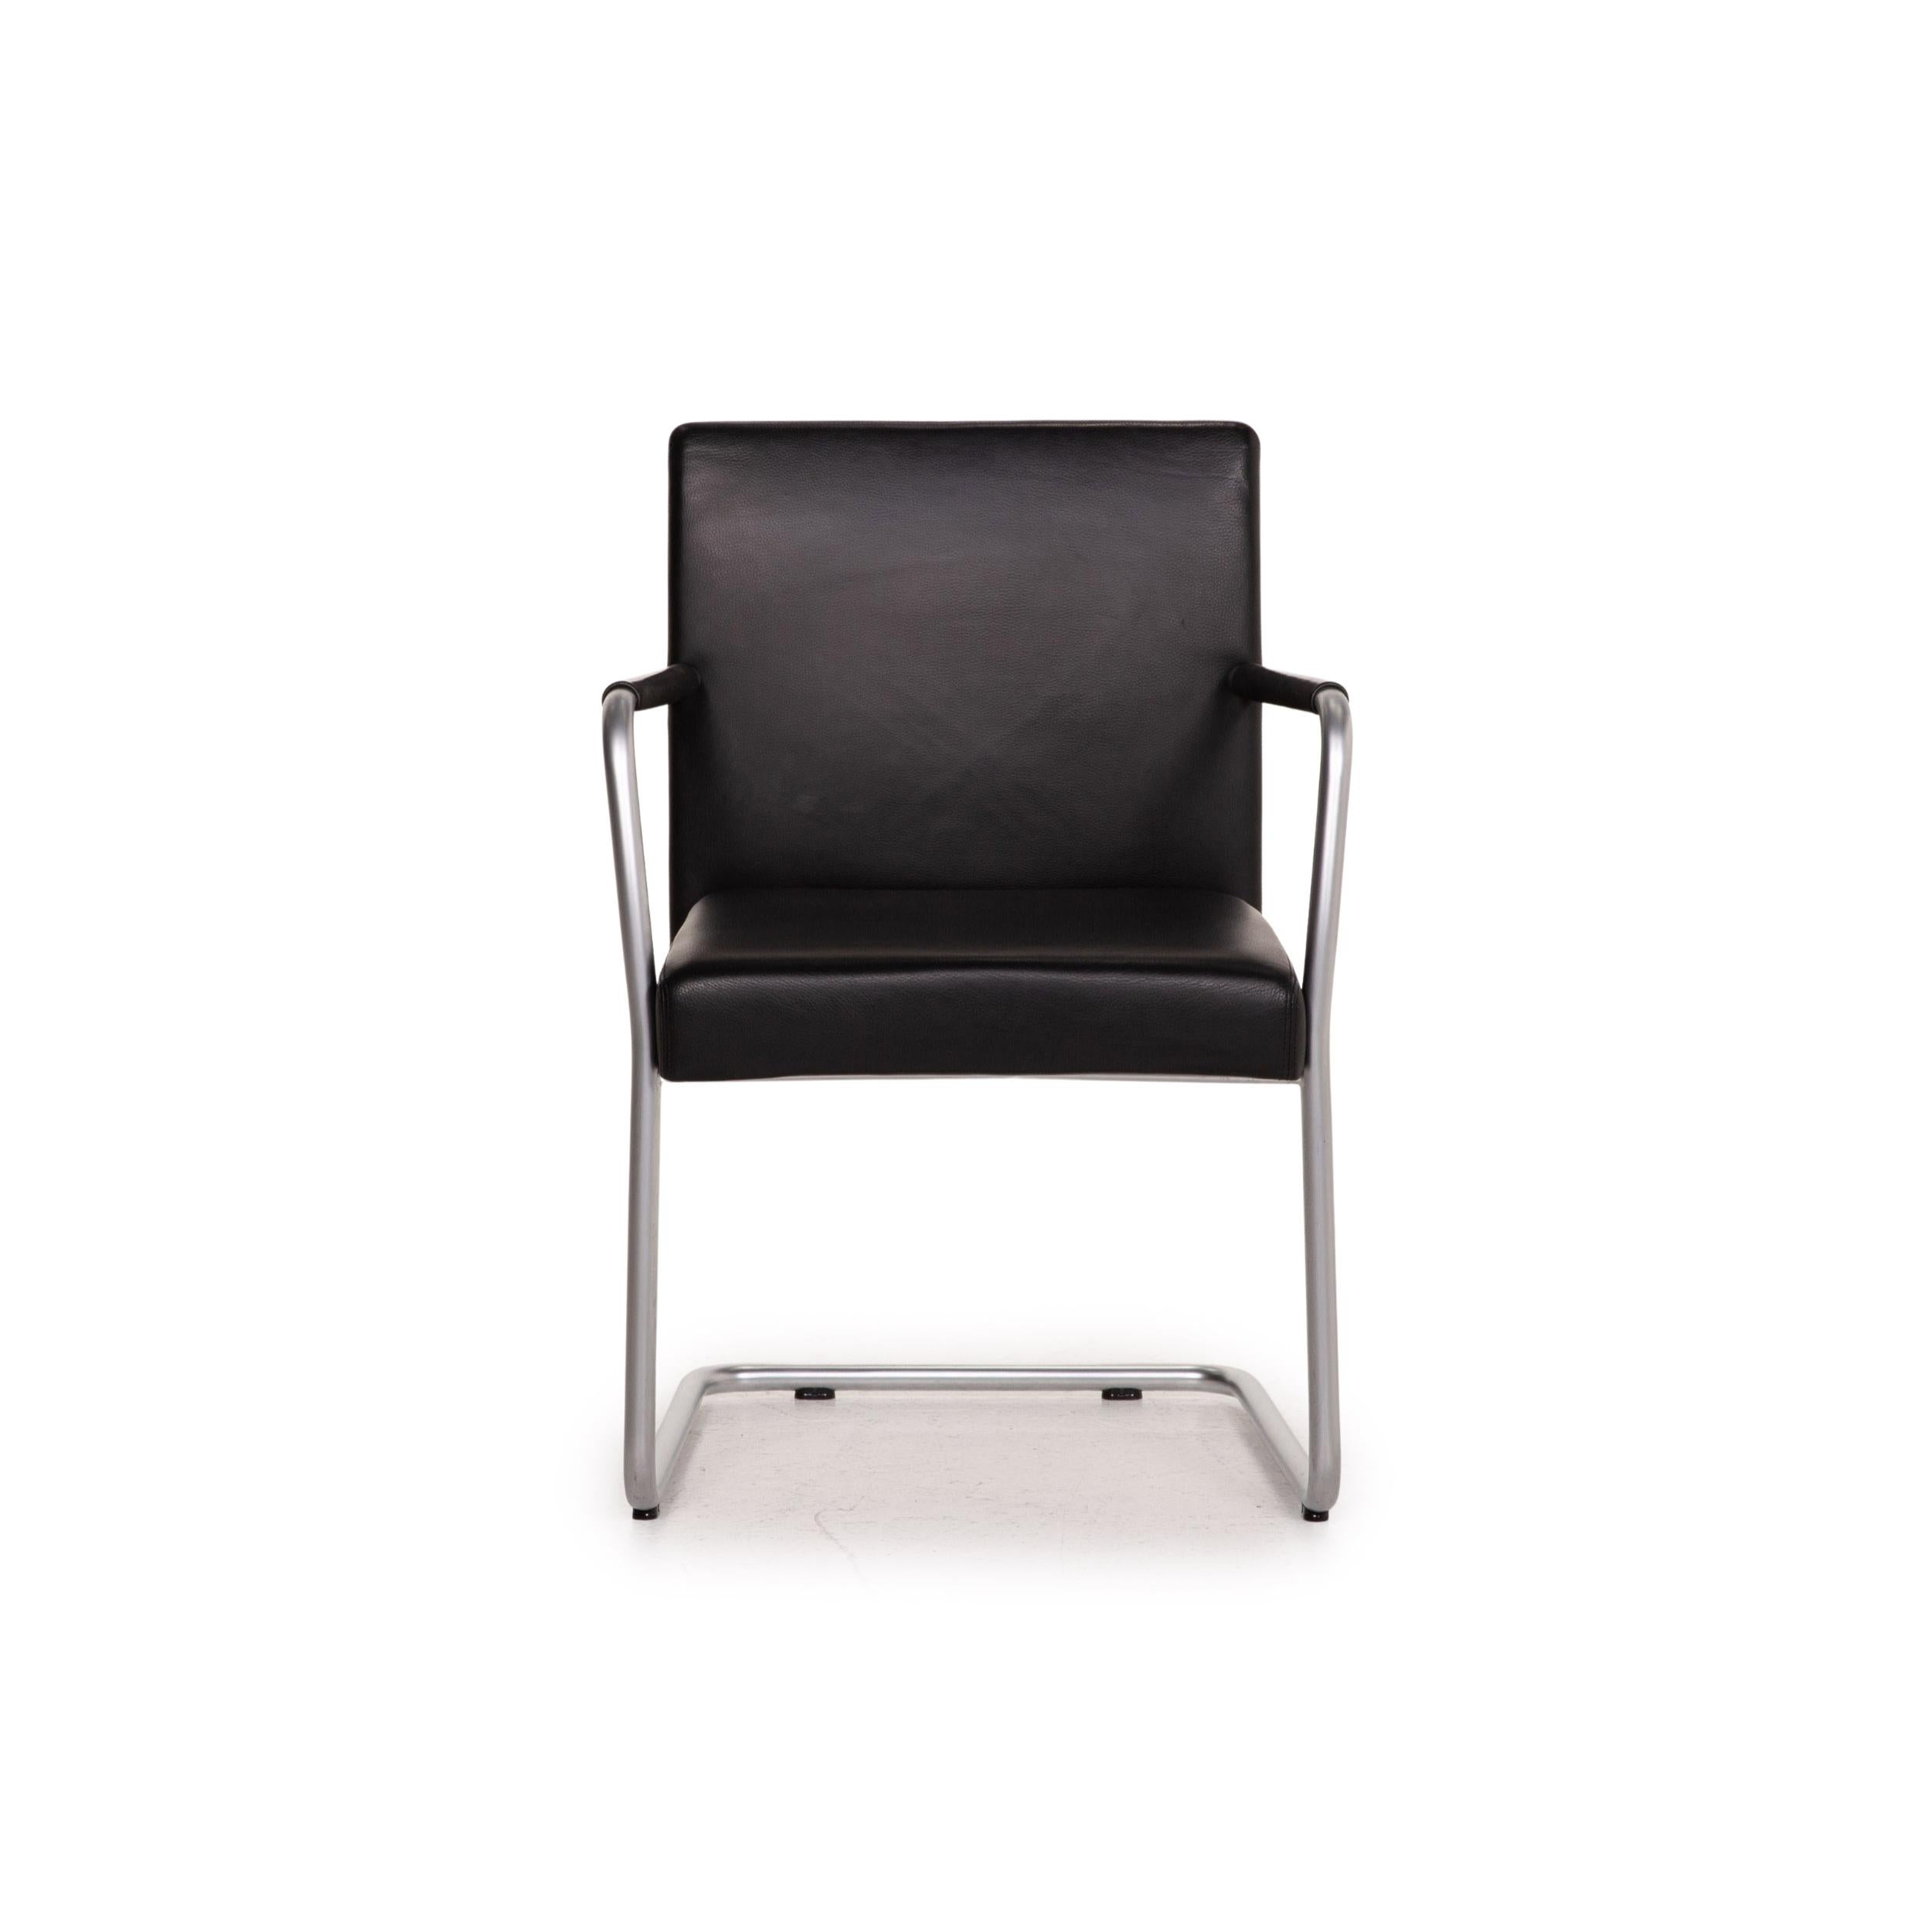 Walter Knoll Jason 1519 Leather Chair Black Cantilever In Good Condition For Sale In Cologne, DE